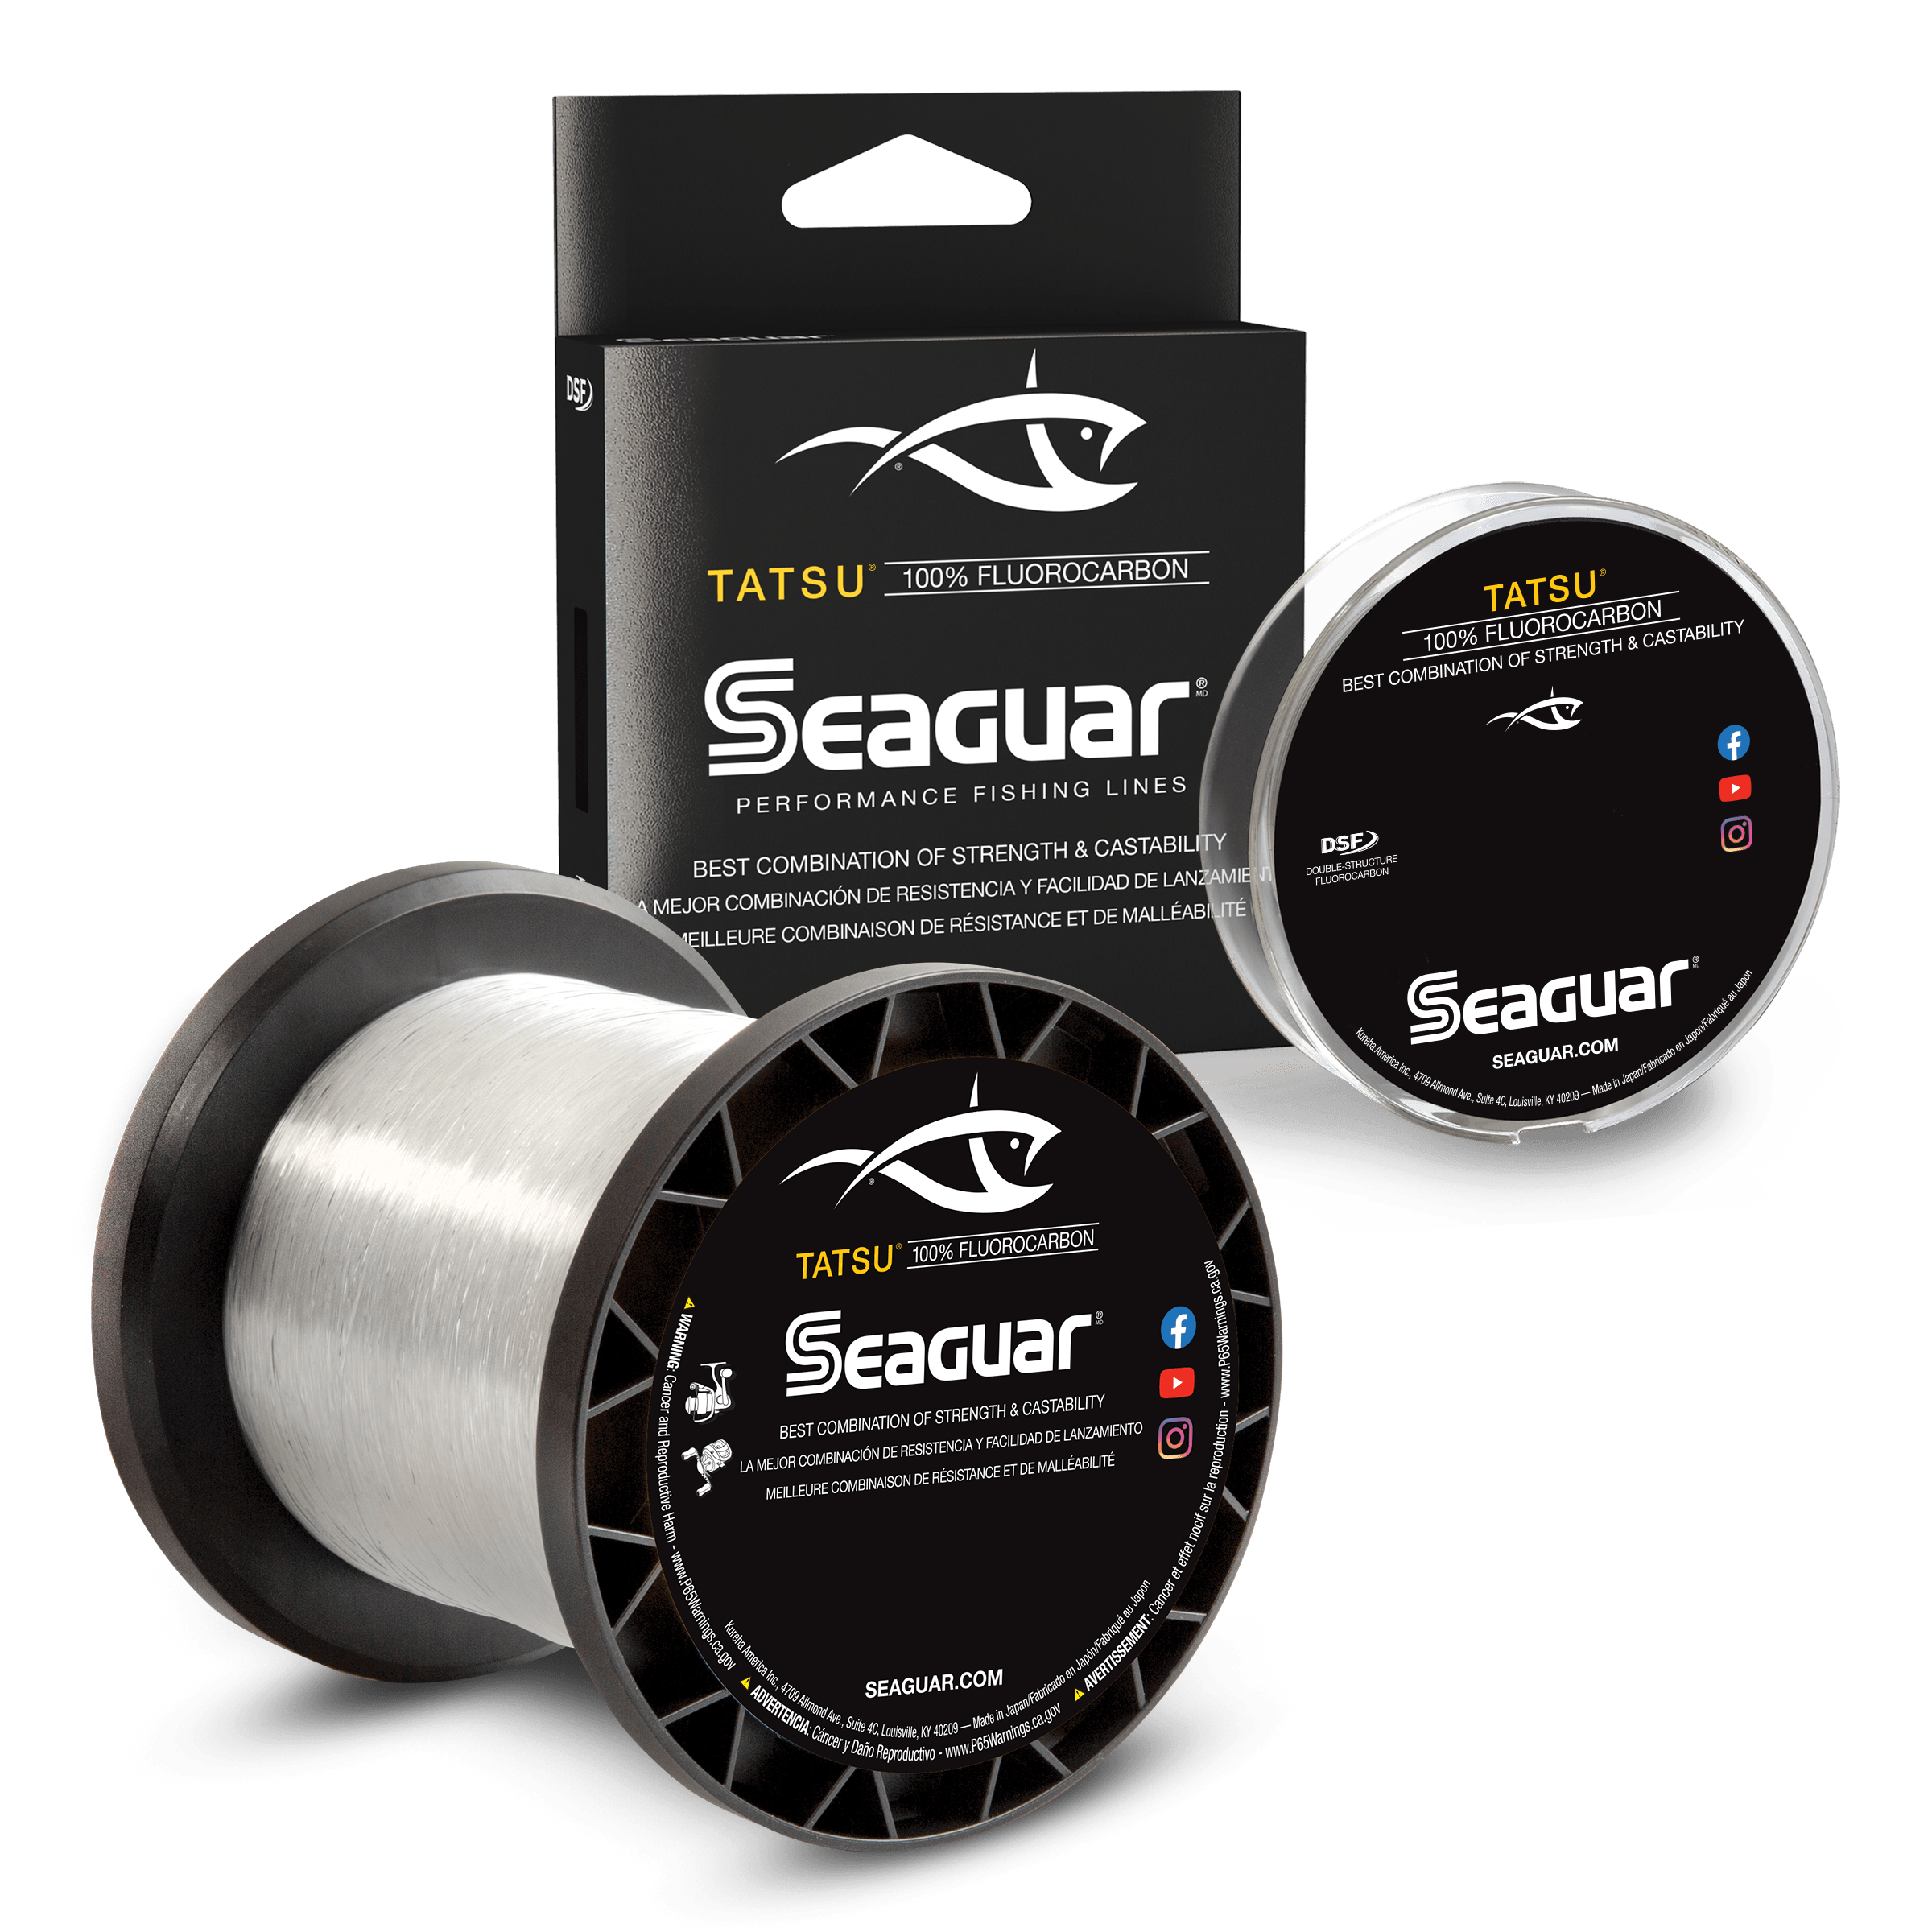 Seaguar White Braided Fishing Fishing Lines & Leaders for sale